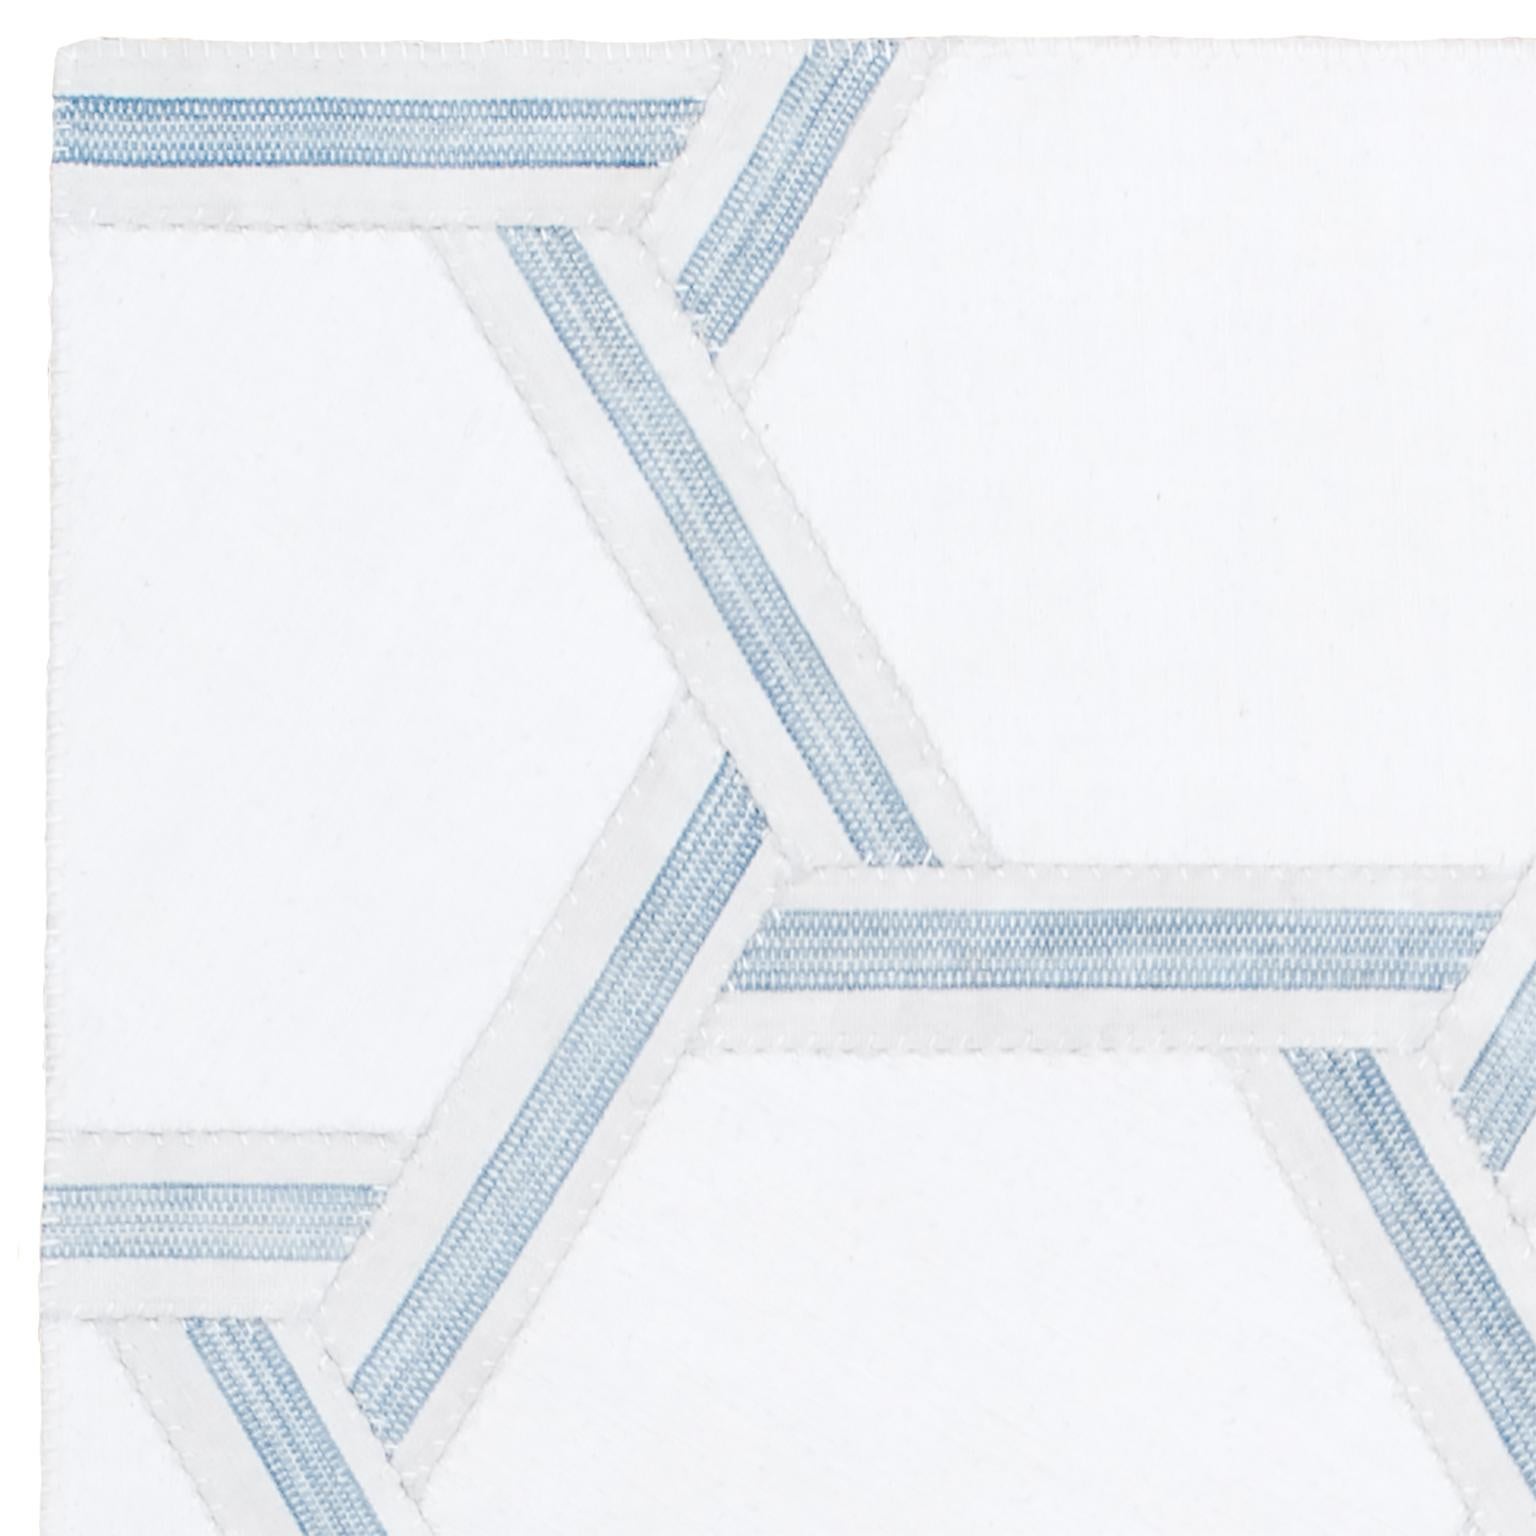 Vintage Kilim Composition composed of Persian panels circa 1940

SPINNING STAR Design. Turkish panels: white (100% cotton, textured), white and blue (linen & cotton).